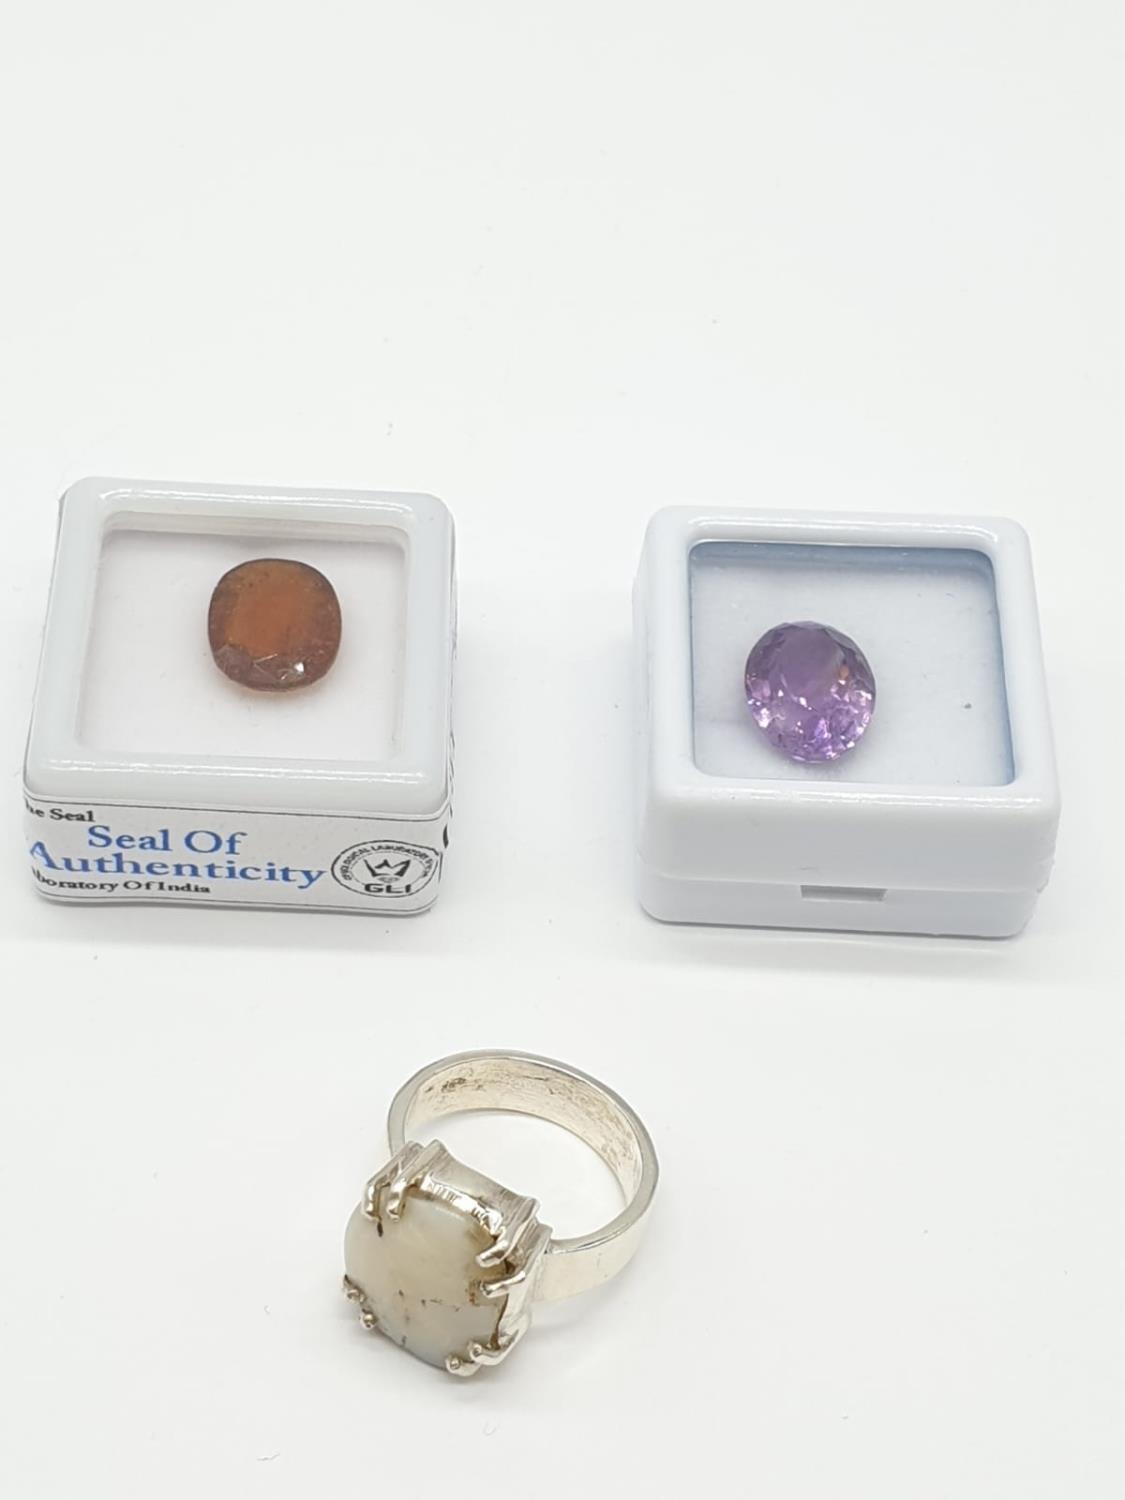 2 Gem Stones GLI CERTIFIED and a dressed silver Ring: 5.40ct natural amethyst 5.15ct natural